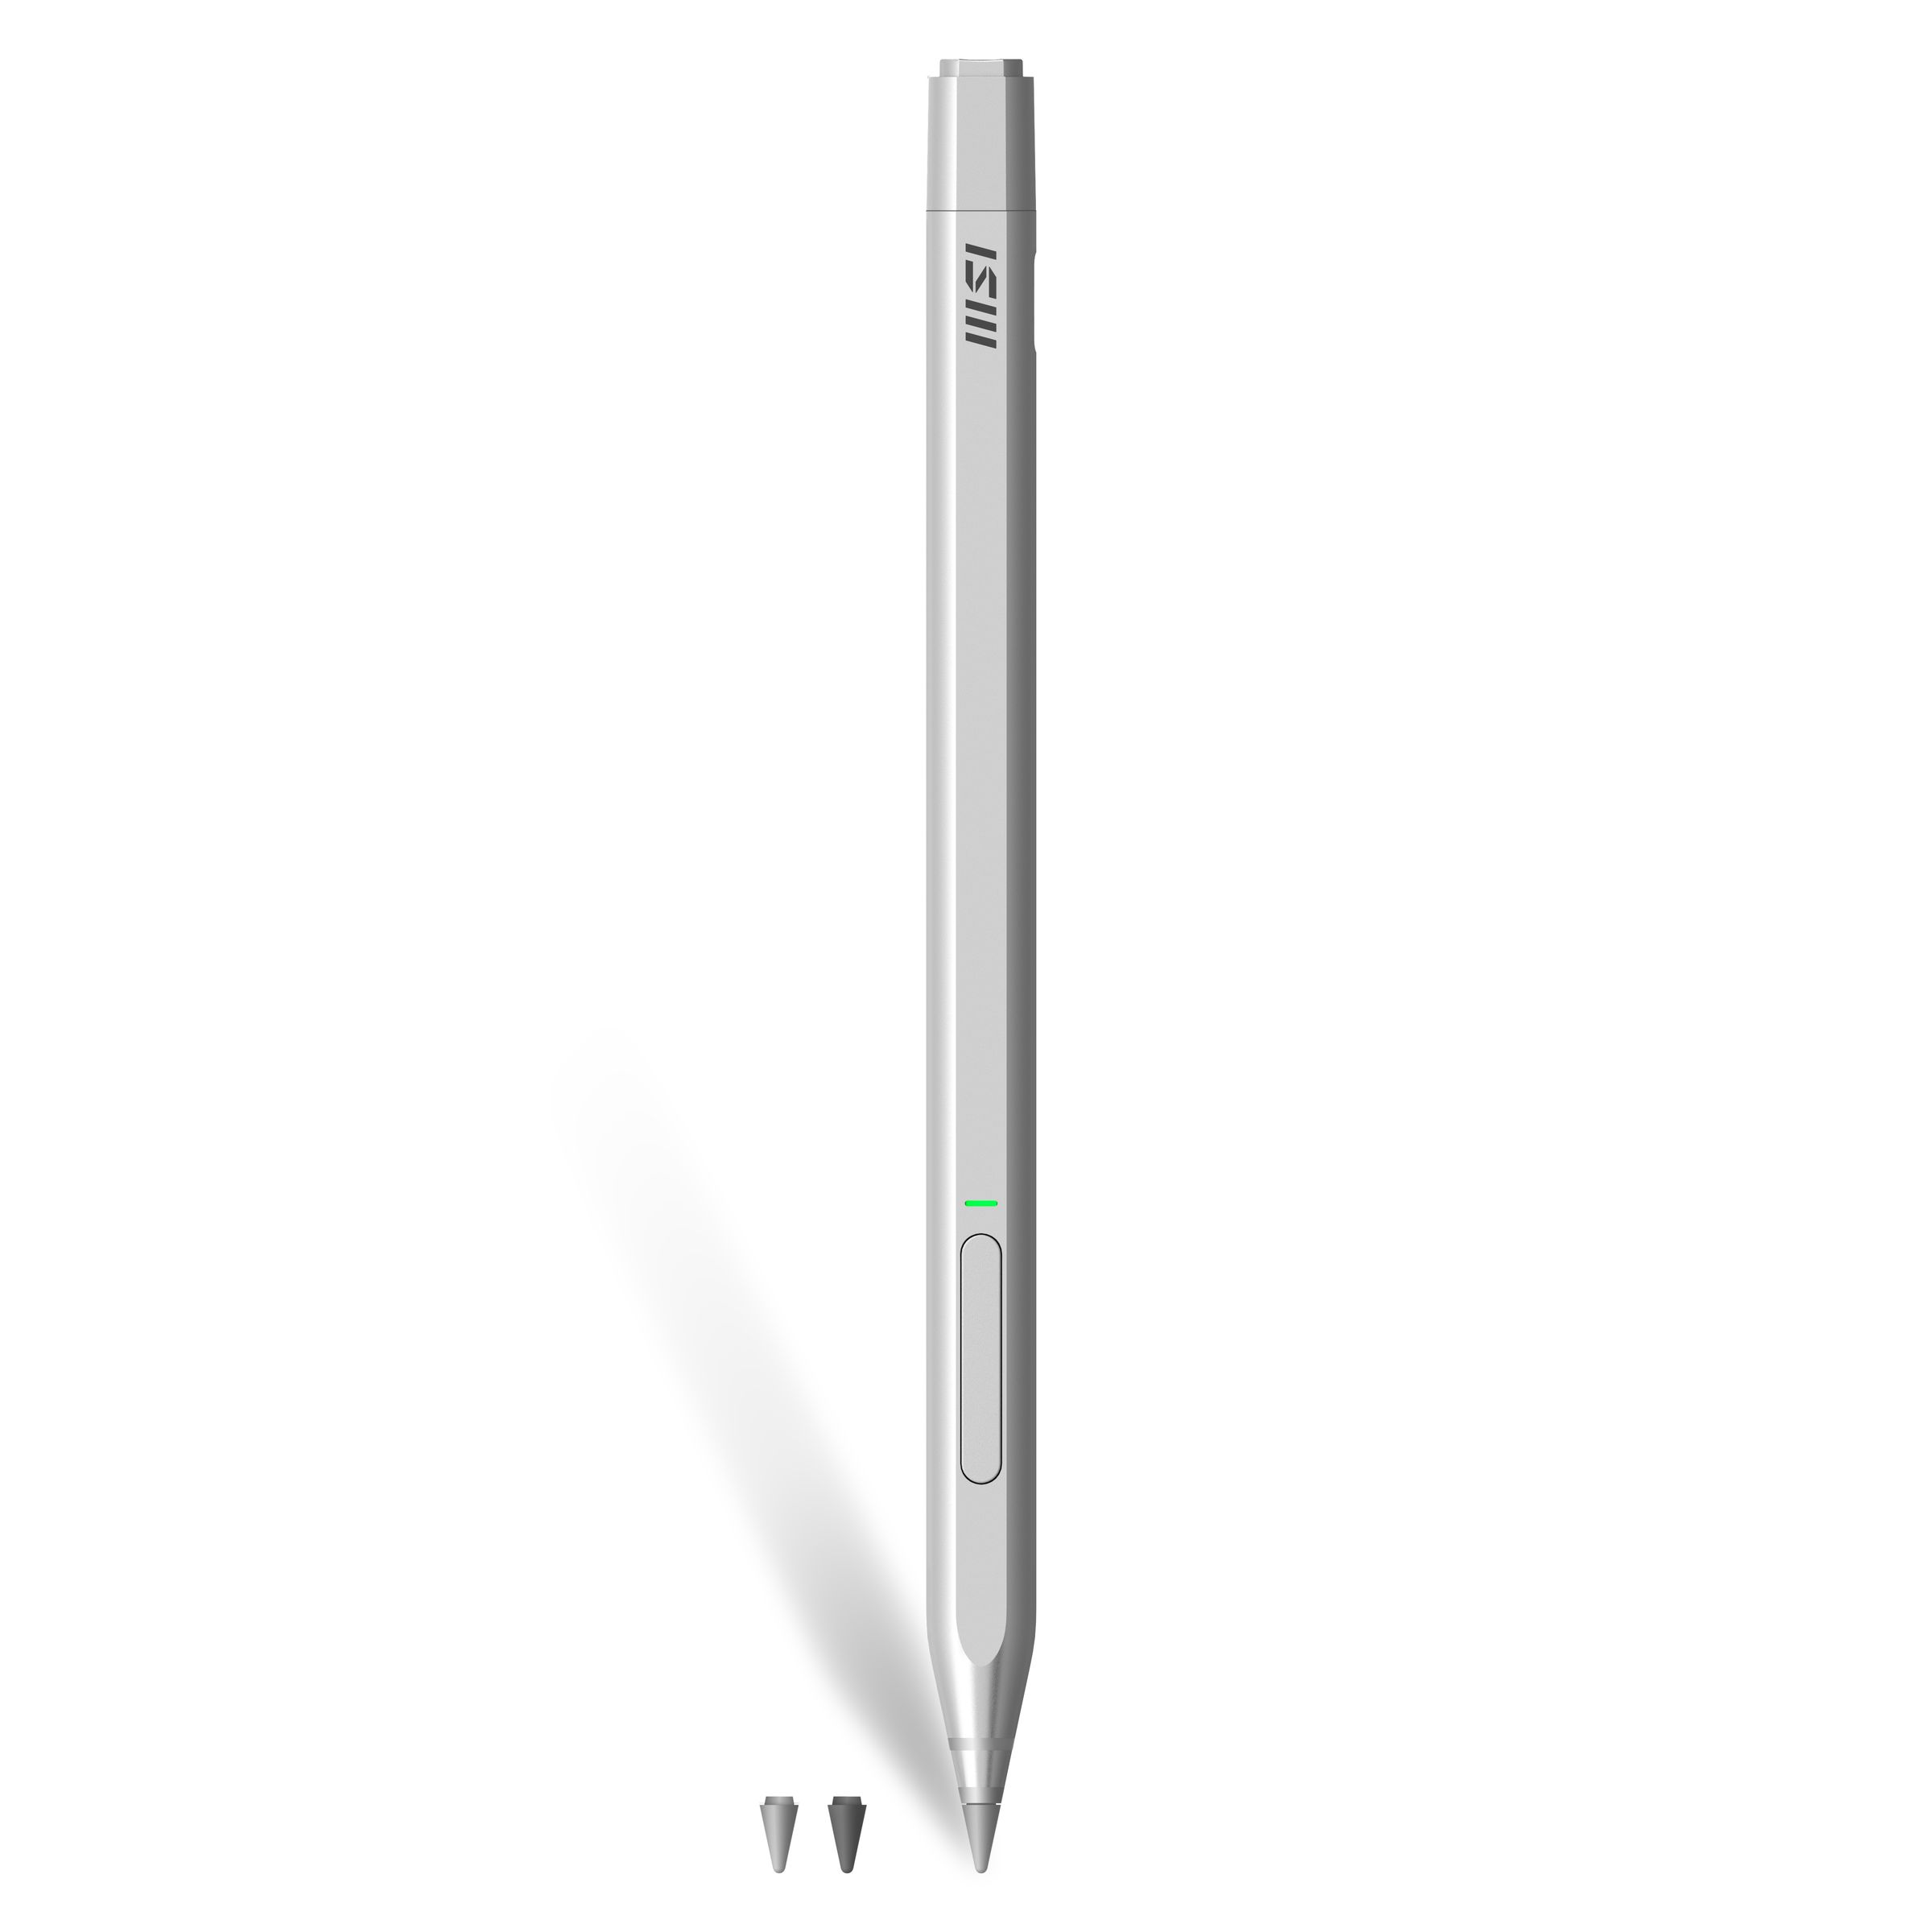 The MSI Pen 2 on a white background.